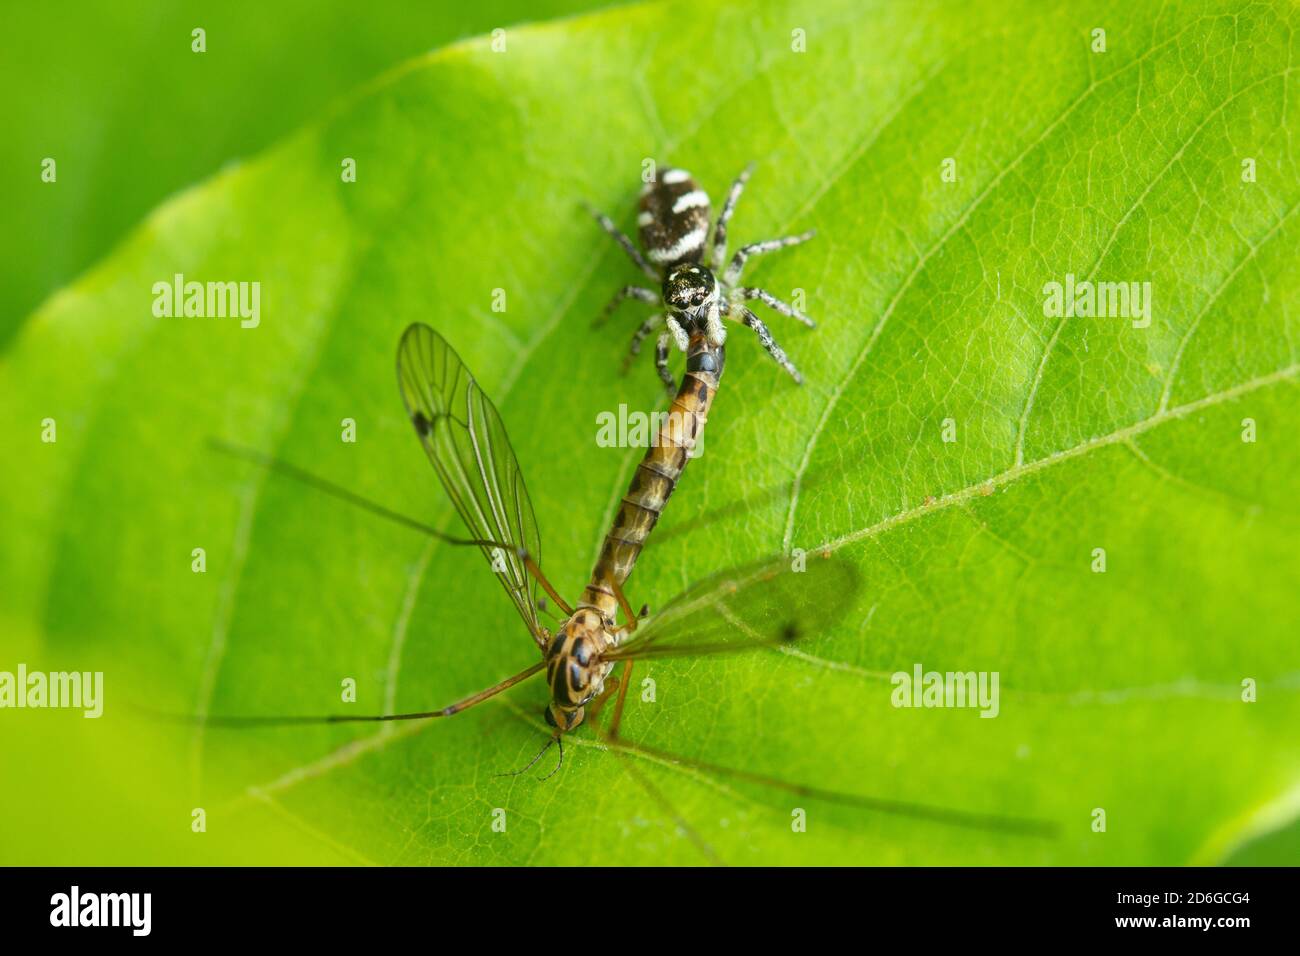 Zebra spider (Salticus scenicus) catches a Crane fly on a leaf Stock Photo